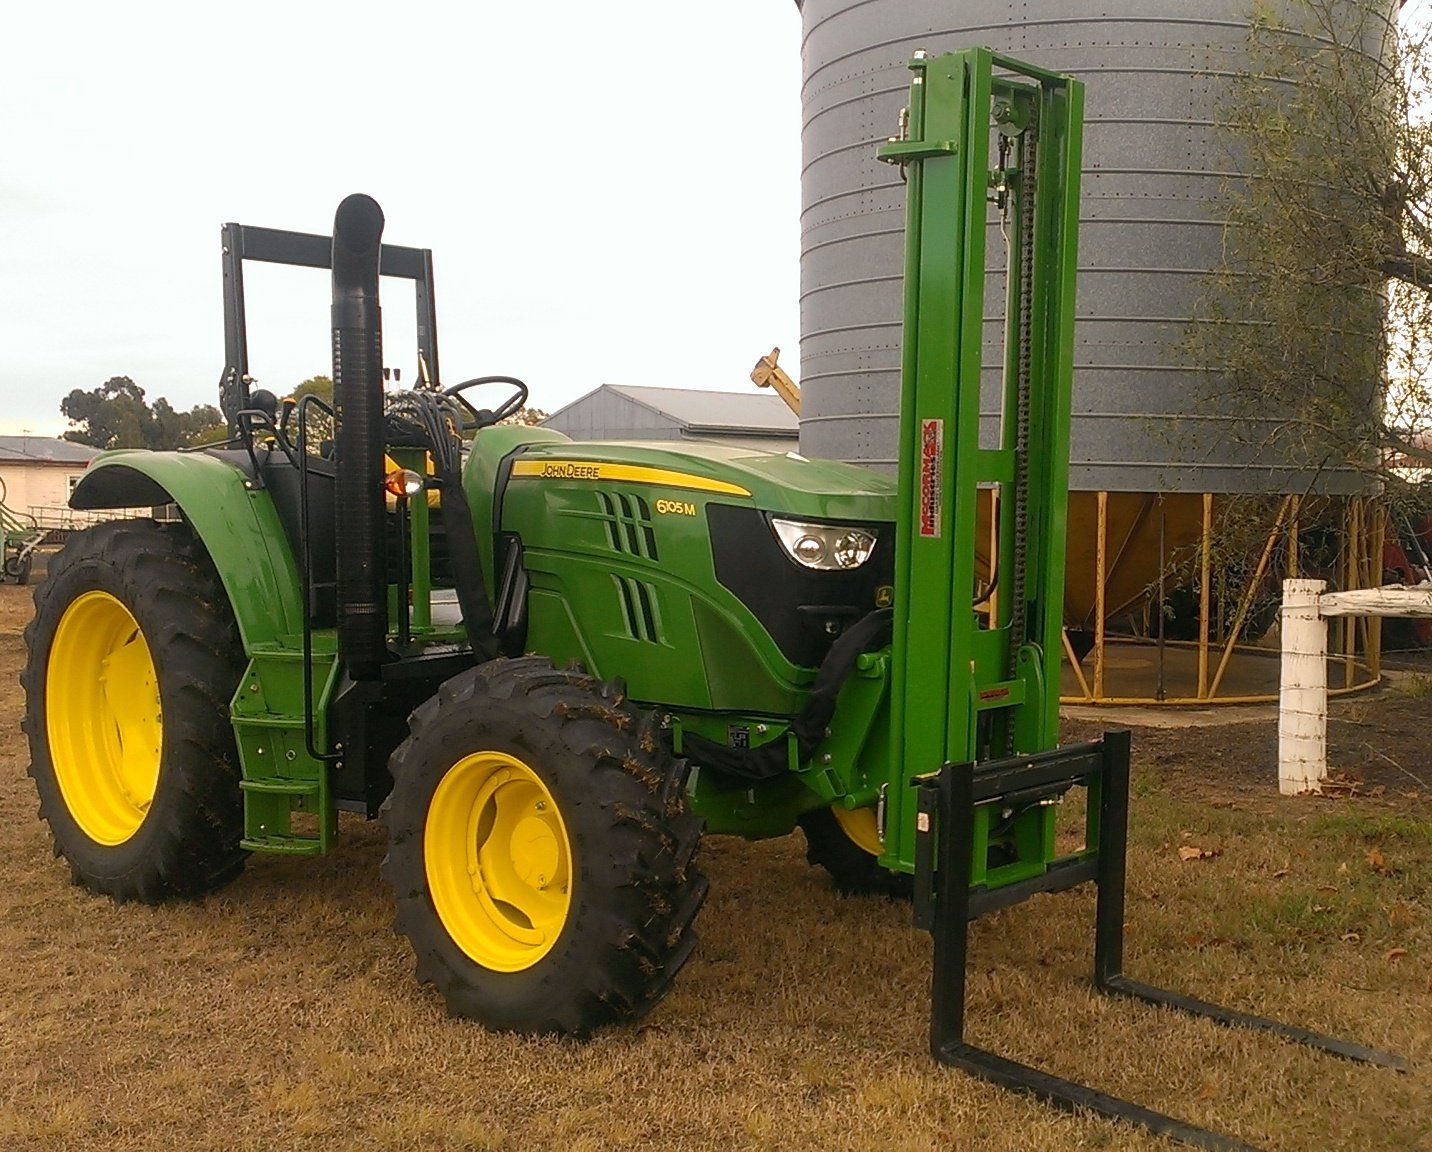 A photo of a McCormack Fork Lift Attachment fitted to a John Deere tractor